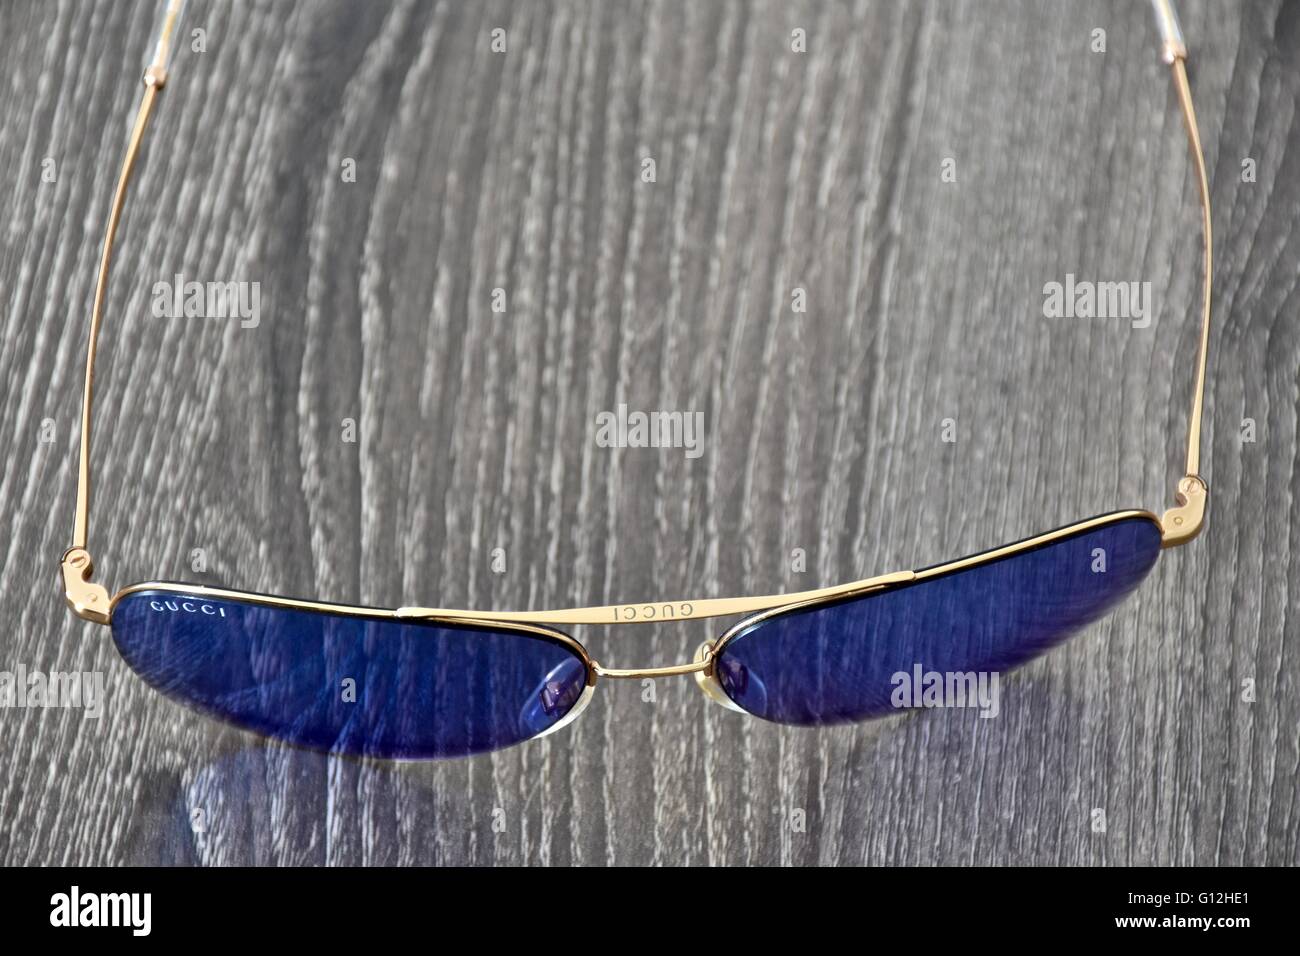 A pair of Gucci sun glasses on a wood surface Stock Photo